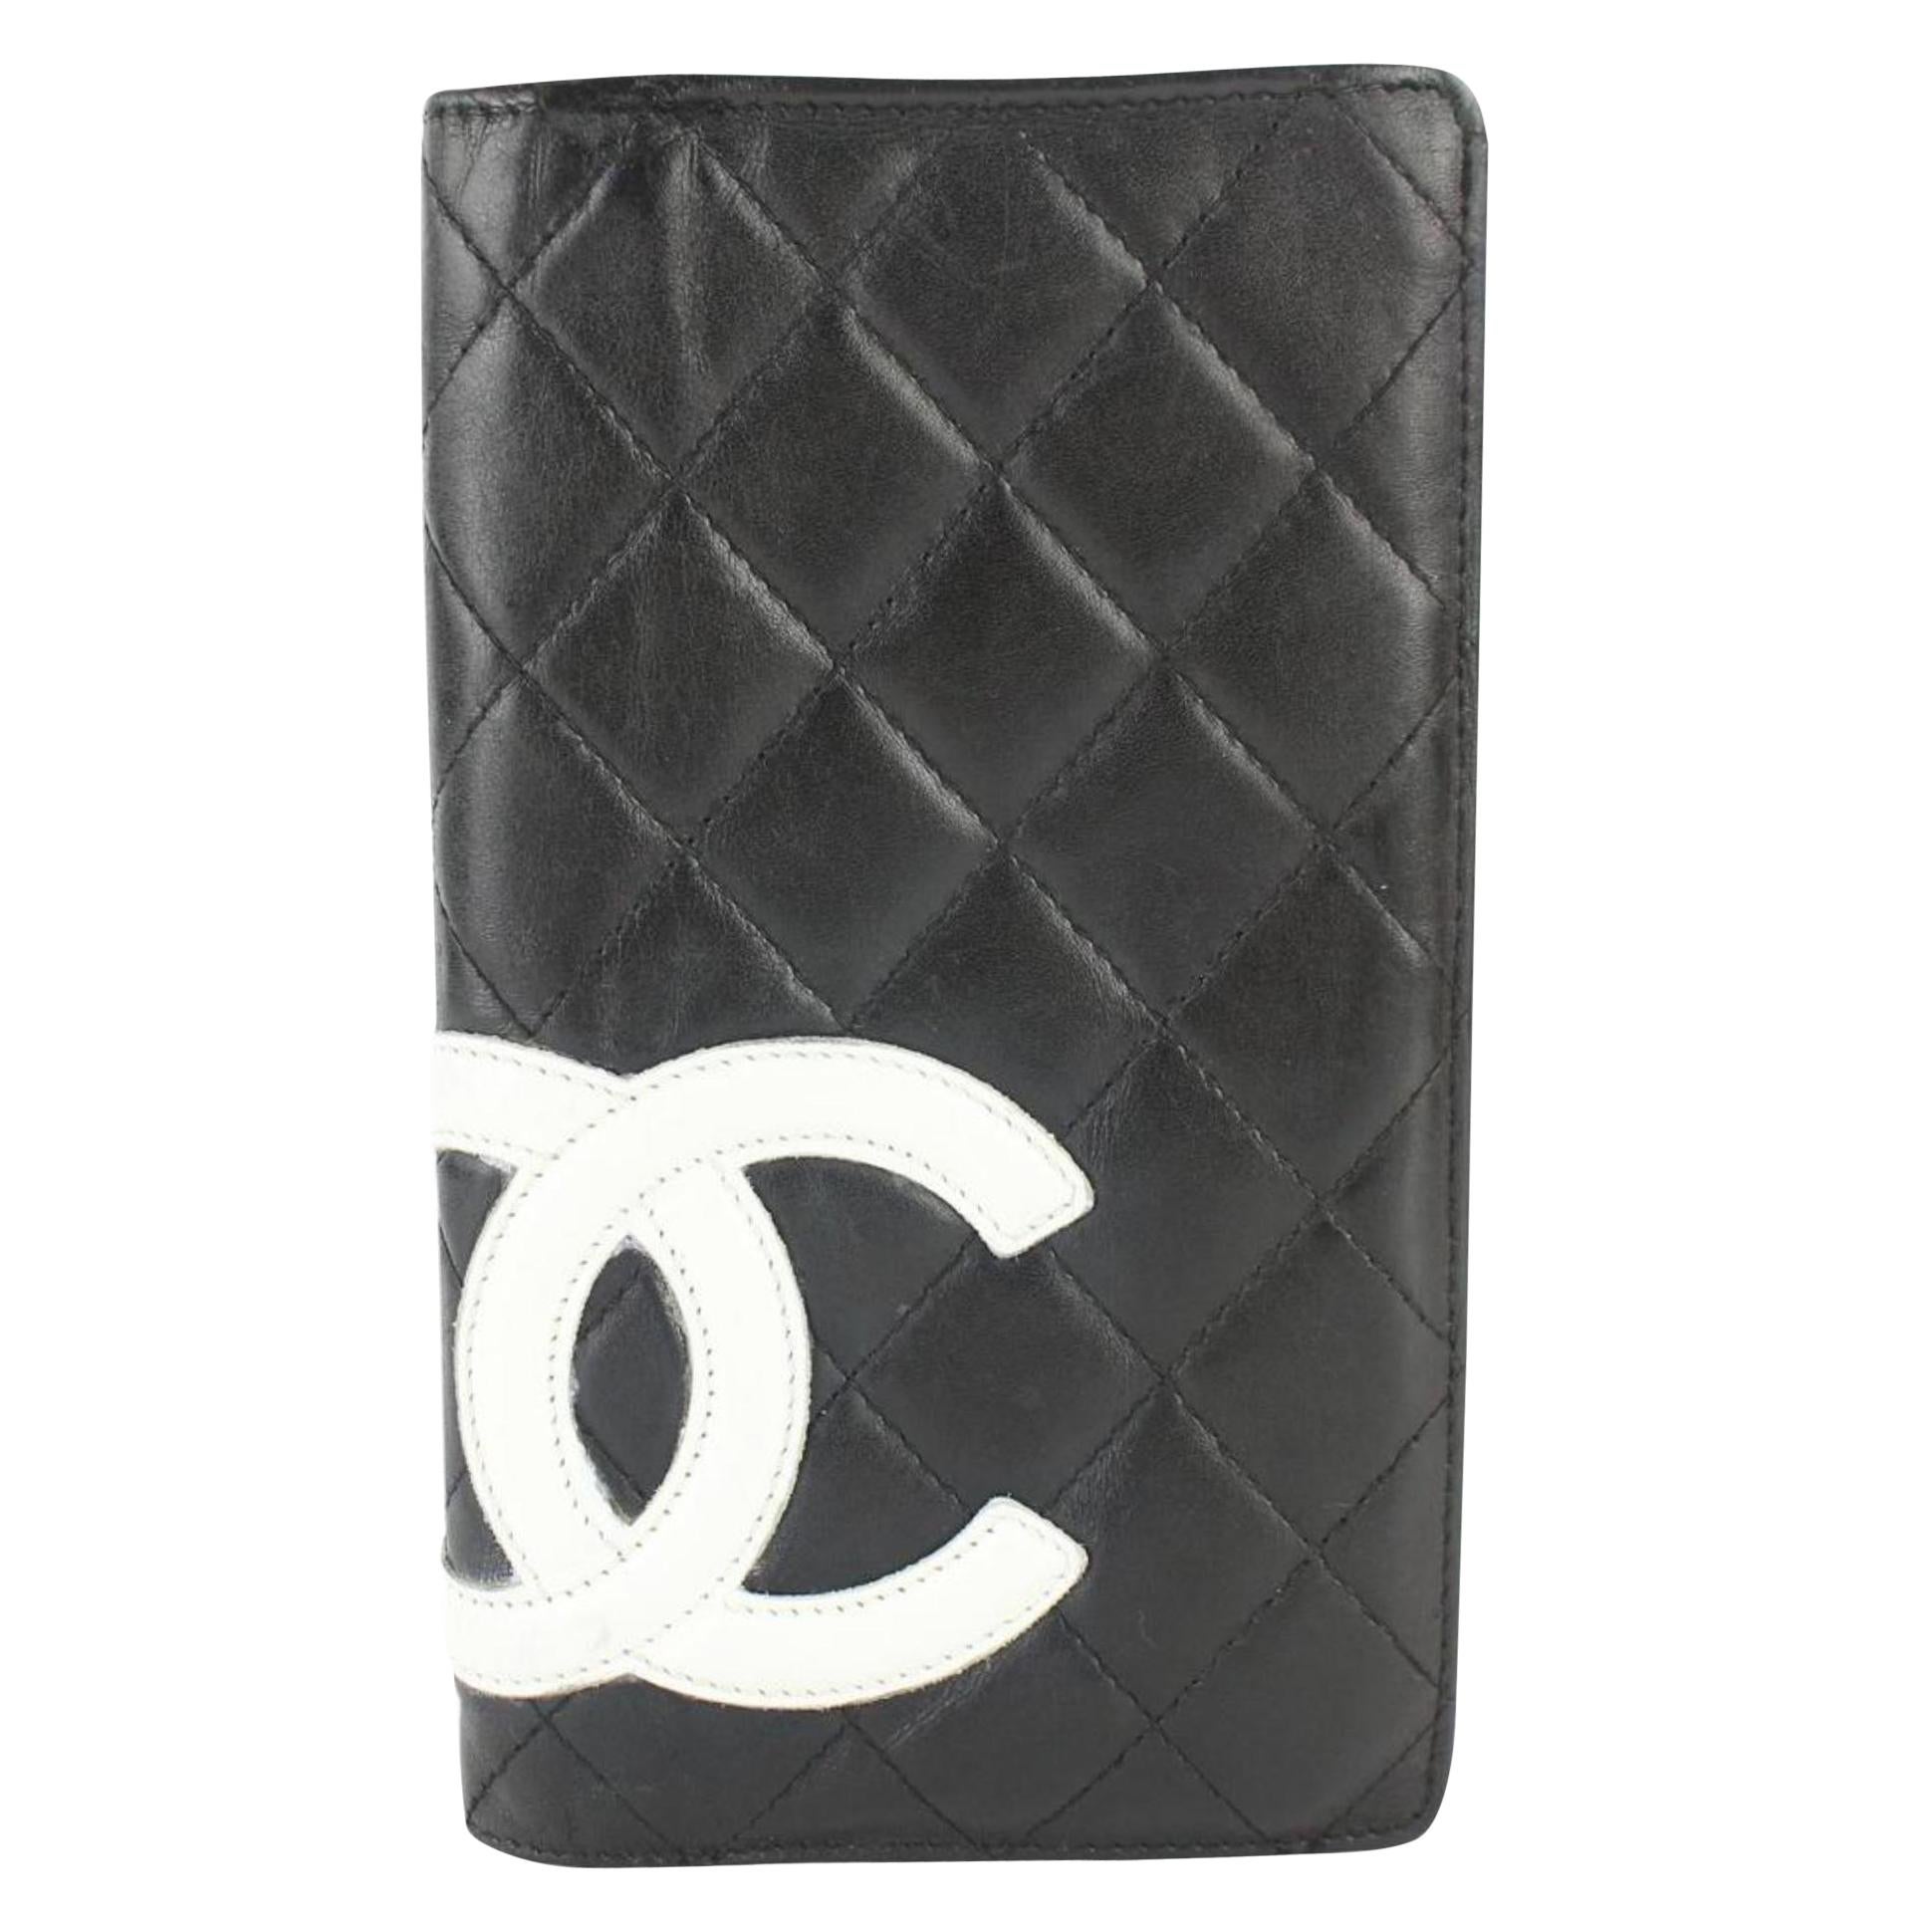 Sold at Auction: CHANEL BLACK LEATHER CAMBON LIGNE SMALL WALLET